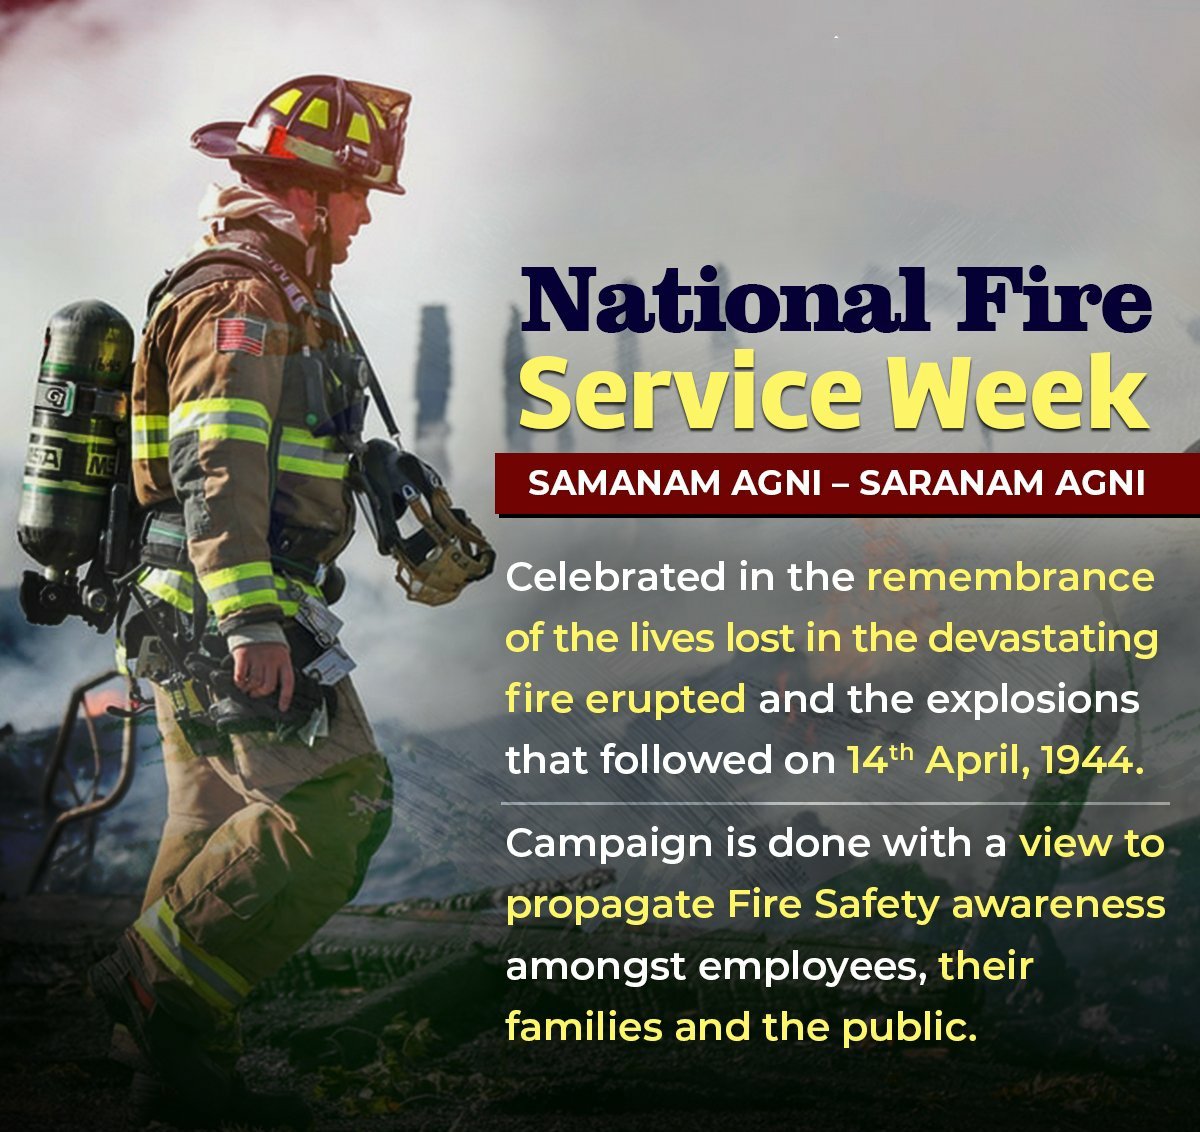 #NationalFireServiceWeek #FireService #BombayExplosion

National Fire Service Week is observed every year to remember those 71 firemen who lost their lives fighting the fire.
#April14th